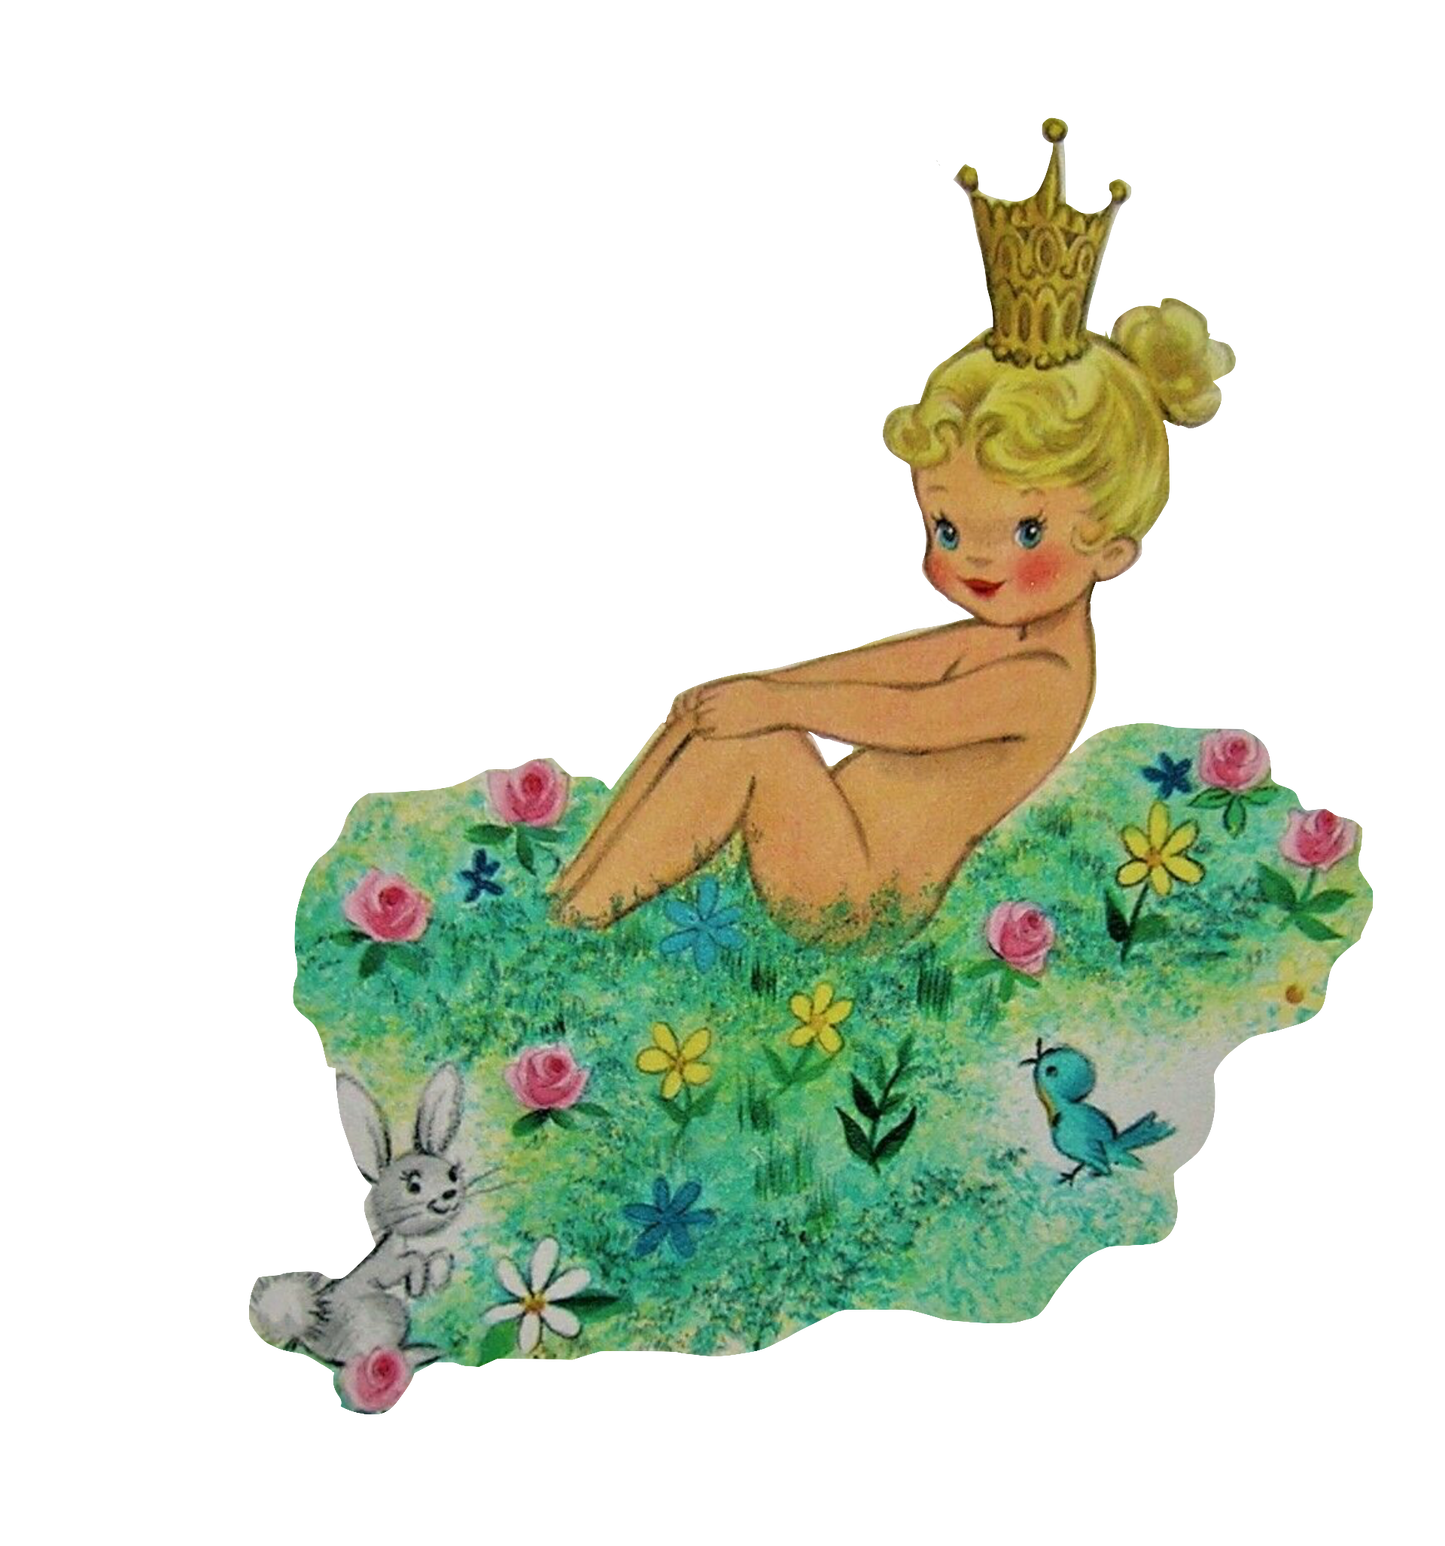 Adorable nude Queen or Princess baby - little girl in the grass and flowers wearing a crown